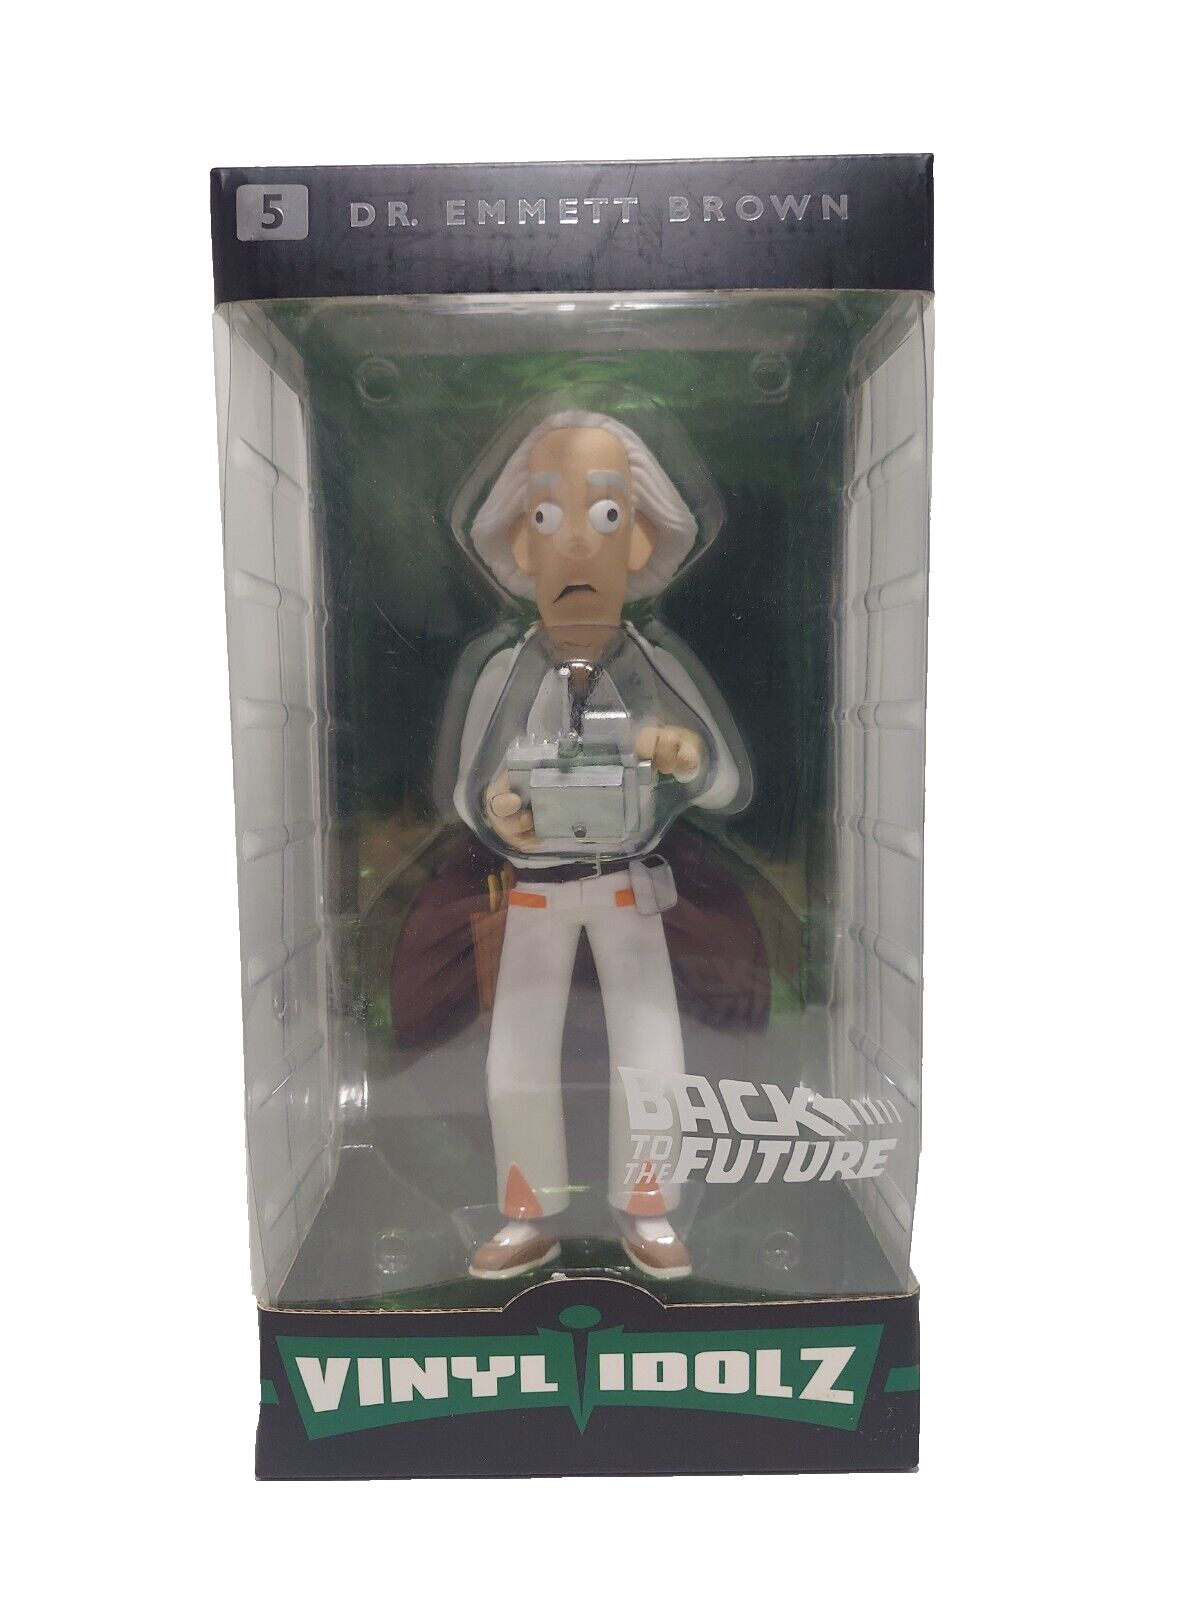 Vinyl Idolz Back To The Future Dr. Emmett Brown #5